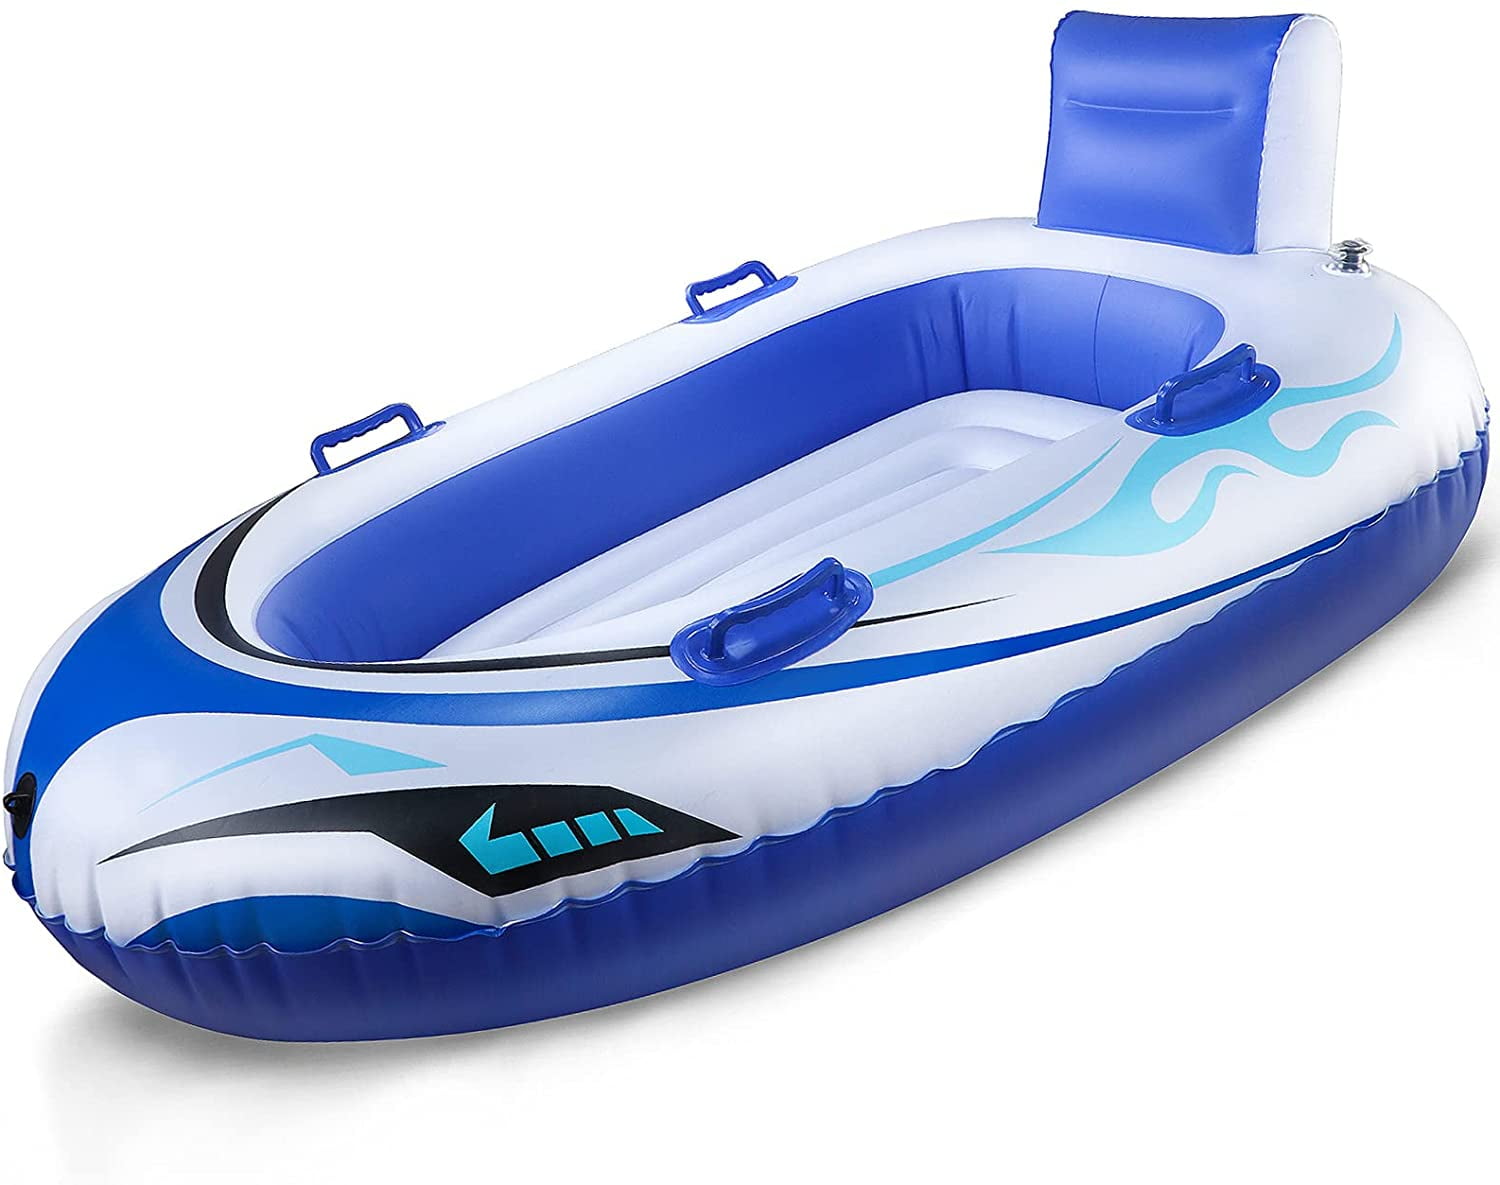 Inflatable Scooter Rider Dinghy Boat Kids Water Toy Swimming Pool Float Age 3+ 